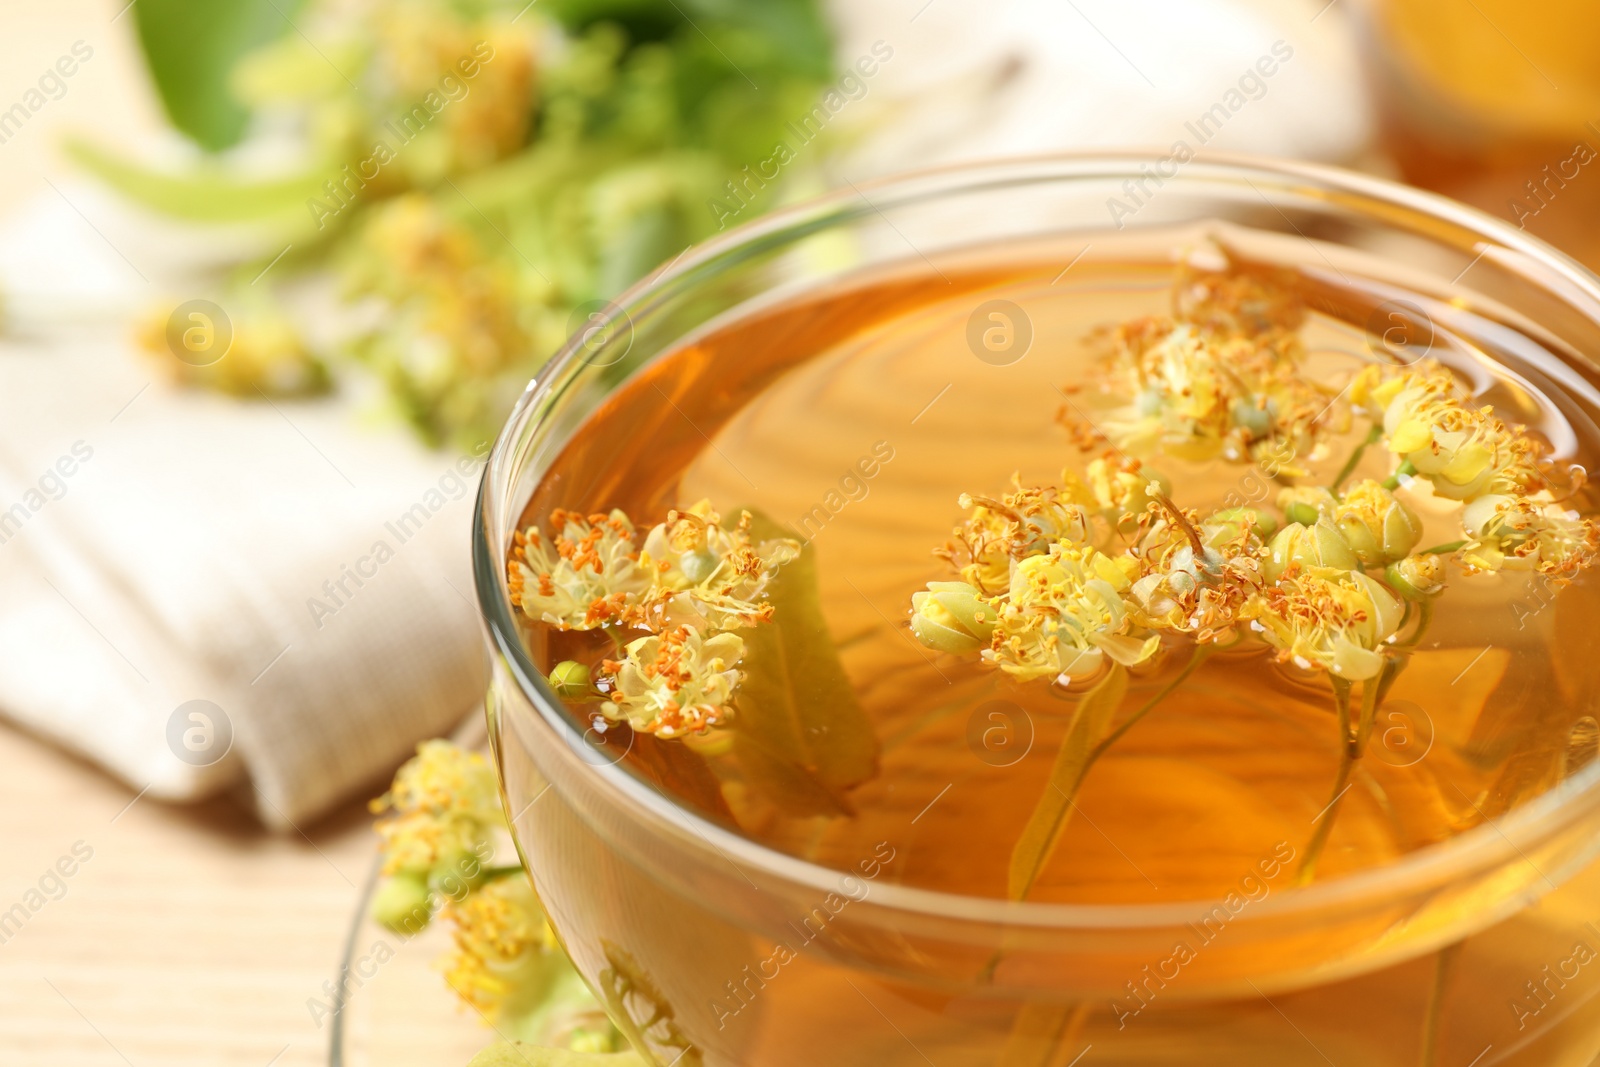 Photo of Cup of tea with linden blossom on table, closeup